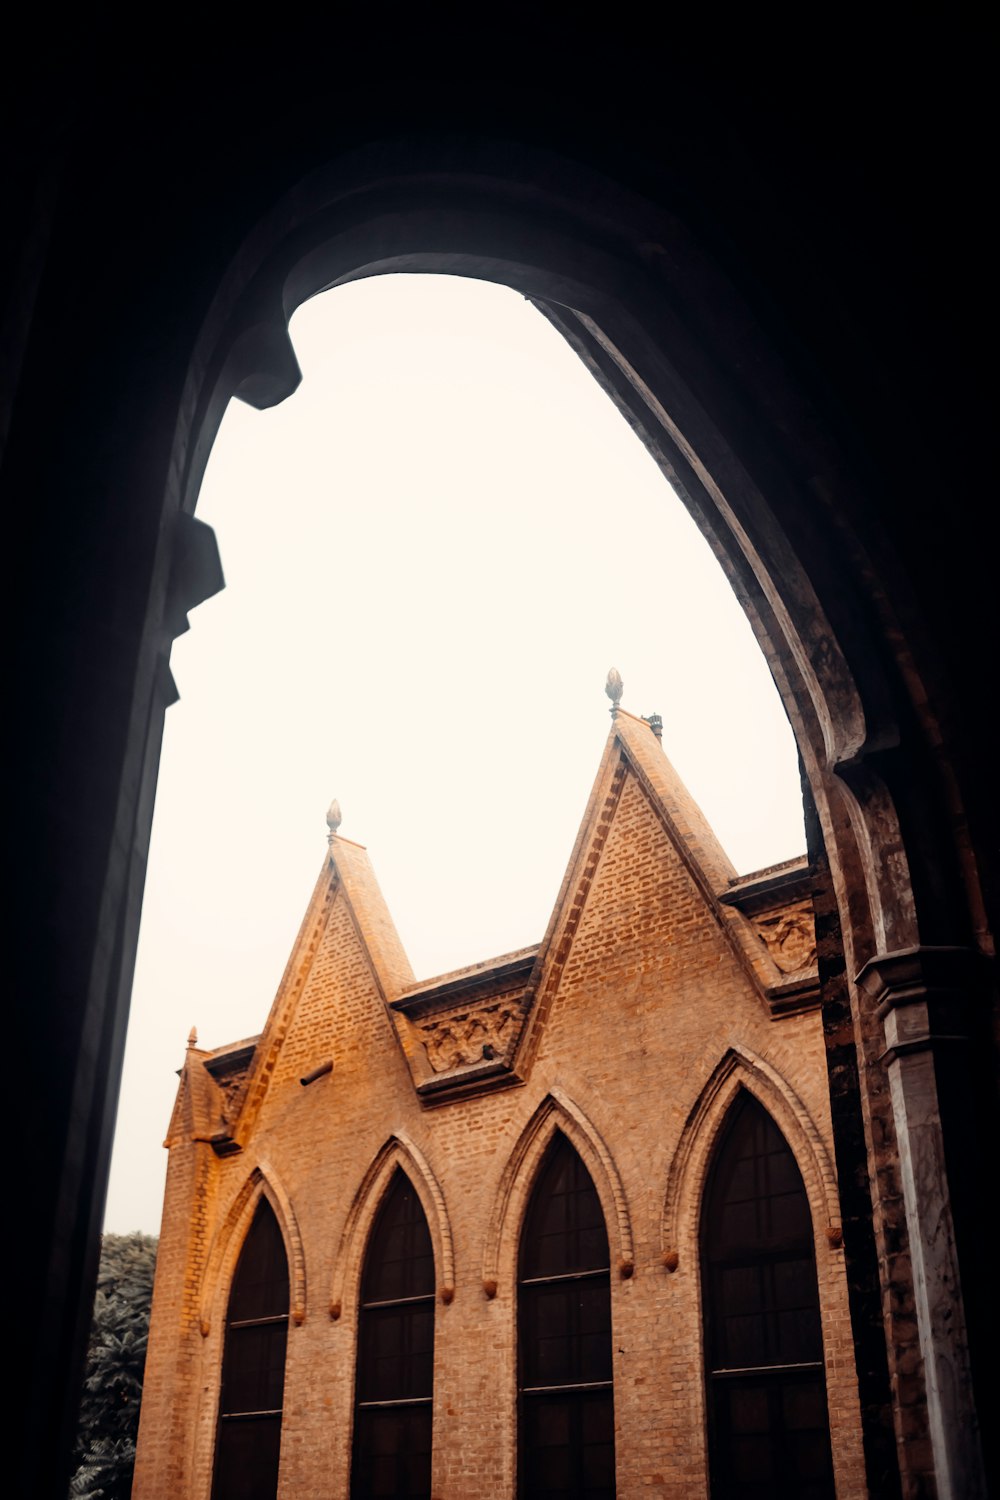 a view of a church through an arched window